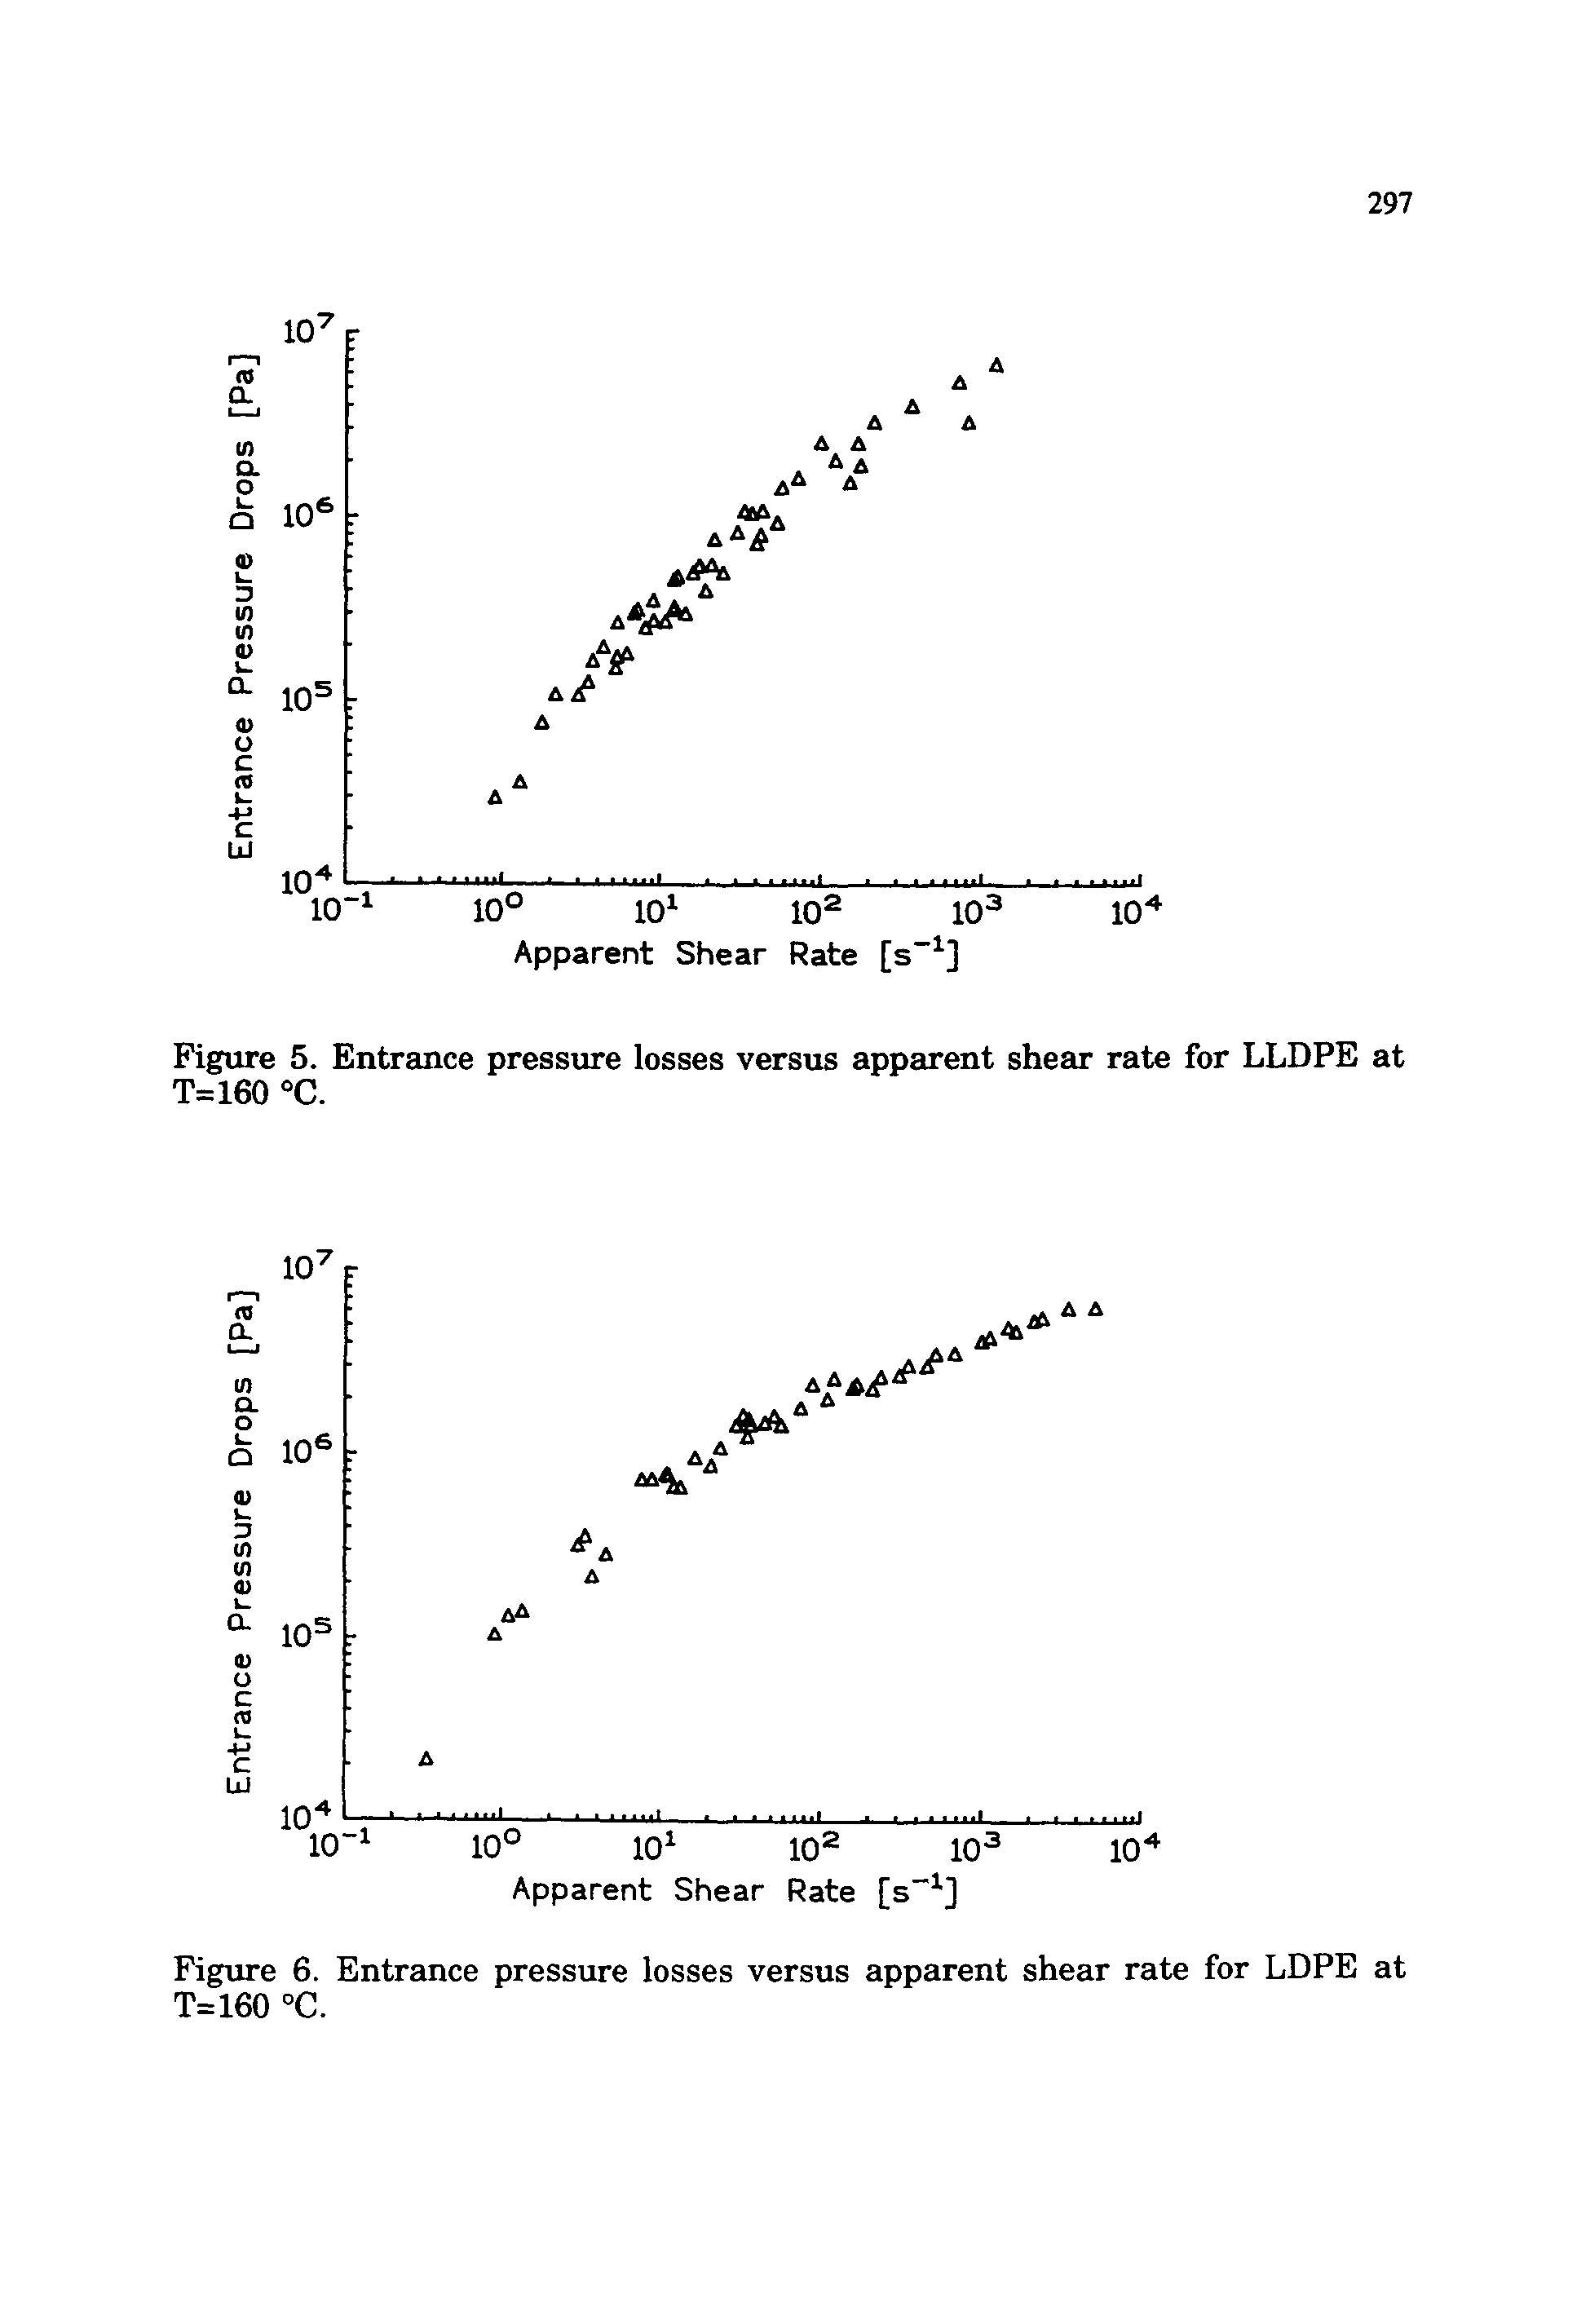 Figure 5. Entrance pressure losses versus apparent shear rate for LLDPE at T=160 C.